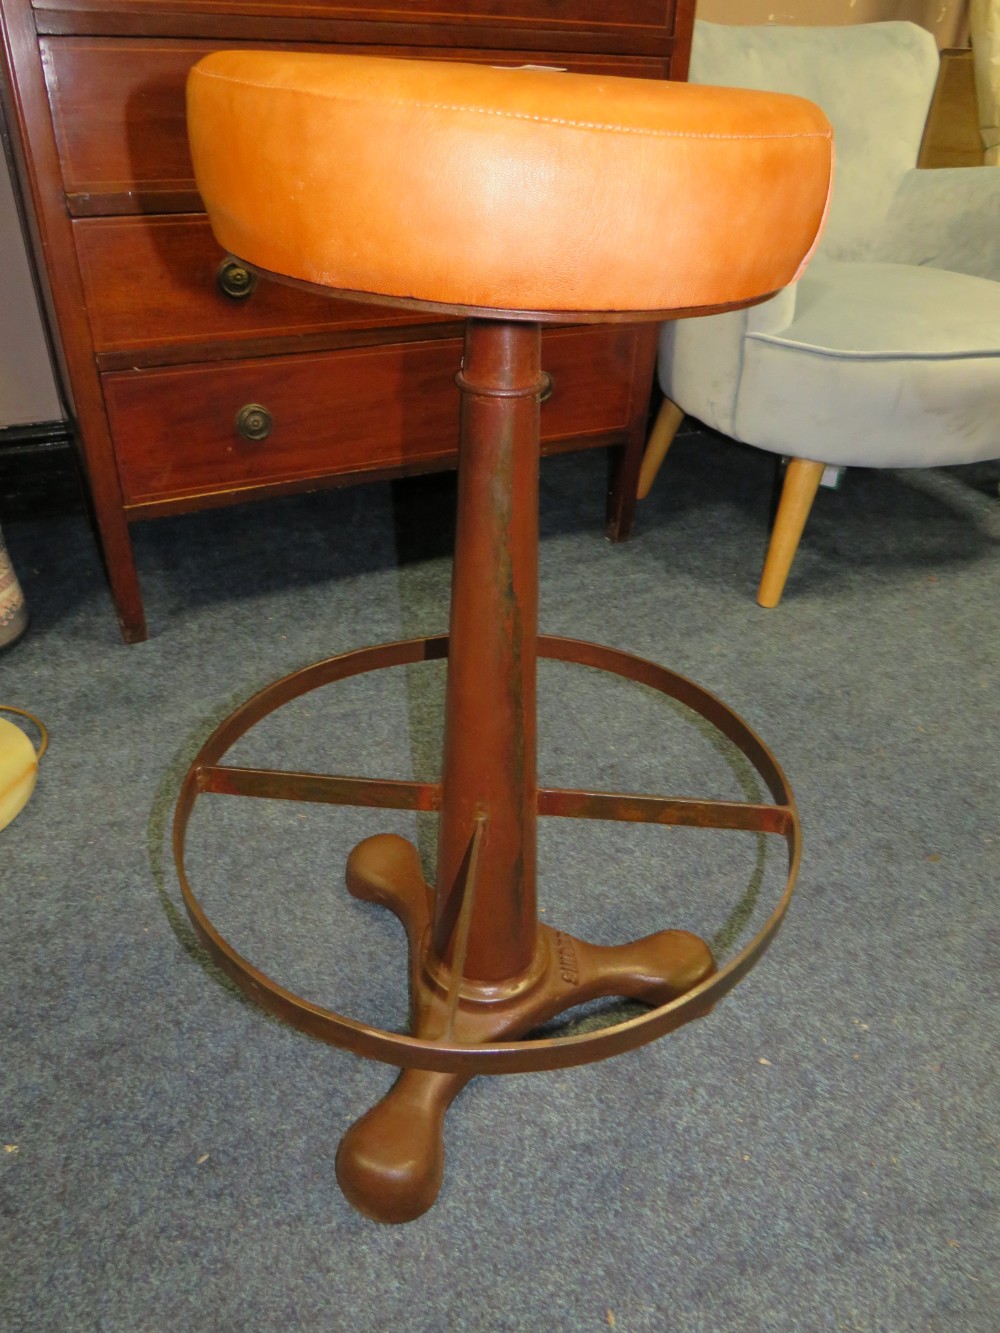 A MODERN INDUSTRIAL STYLE 'SINGER' STOOL